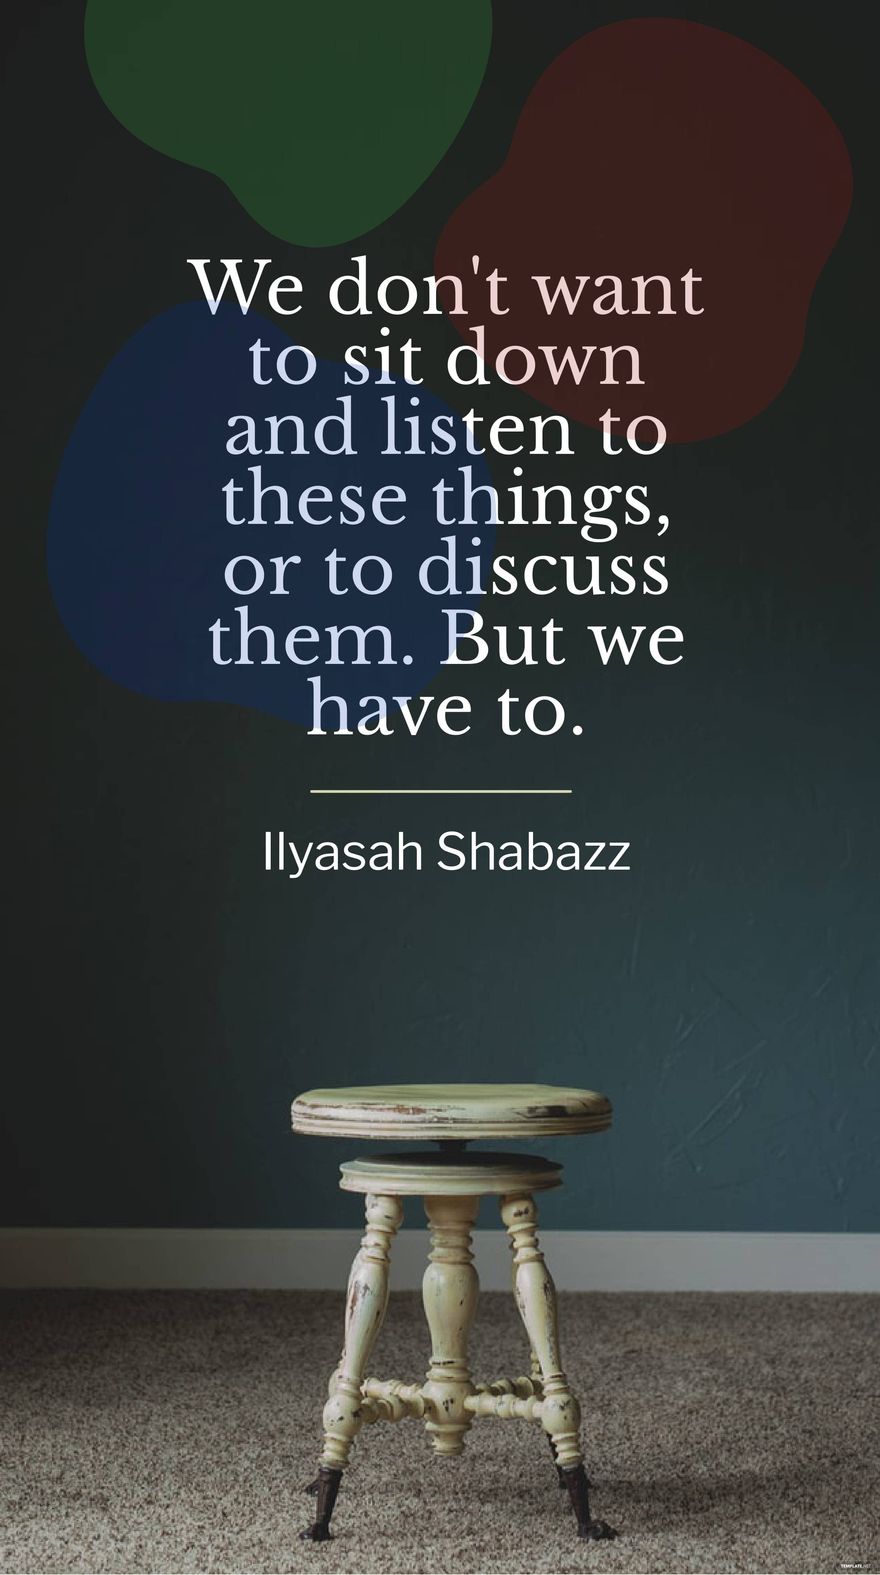 Ilyasah Shabazz  - We don't want to sit down and listen to these things, or to discuss them. But we have to.